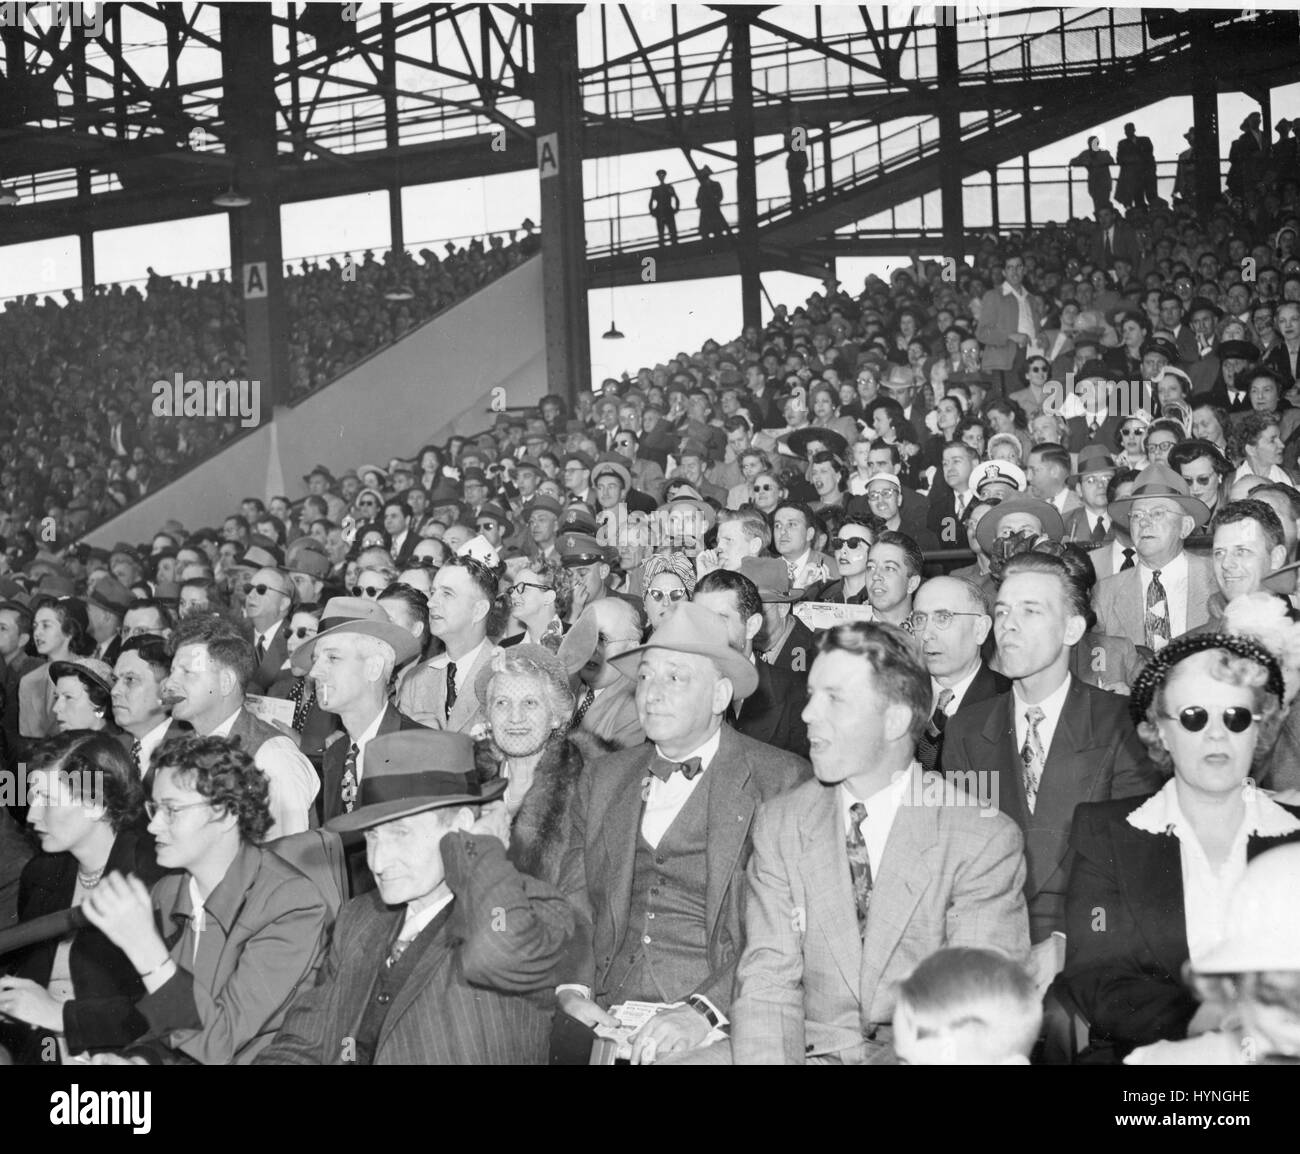 View of the crowd in Griffith Stadium at opening game of the 1950 baseball season. Washington, DC, 1950. Stock Photo